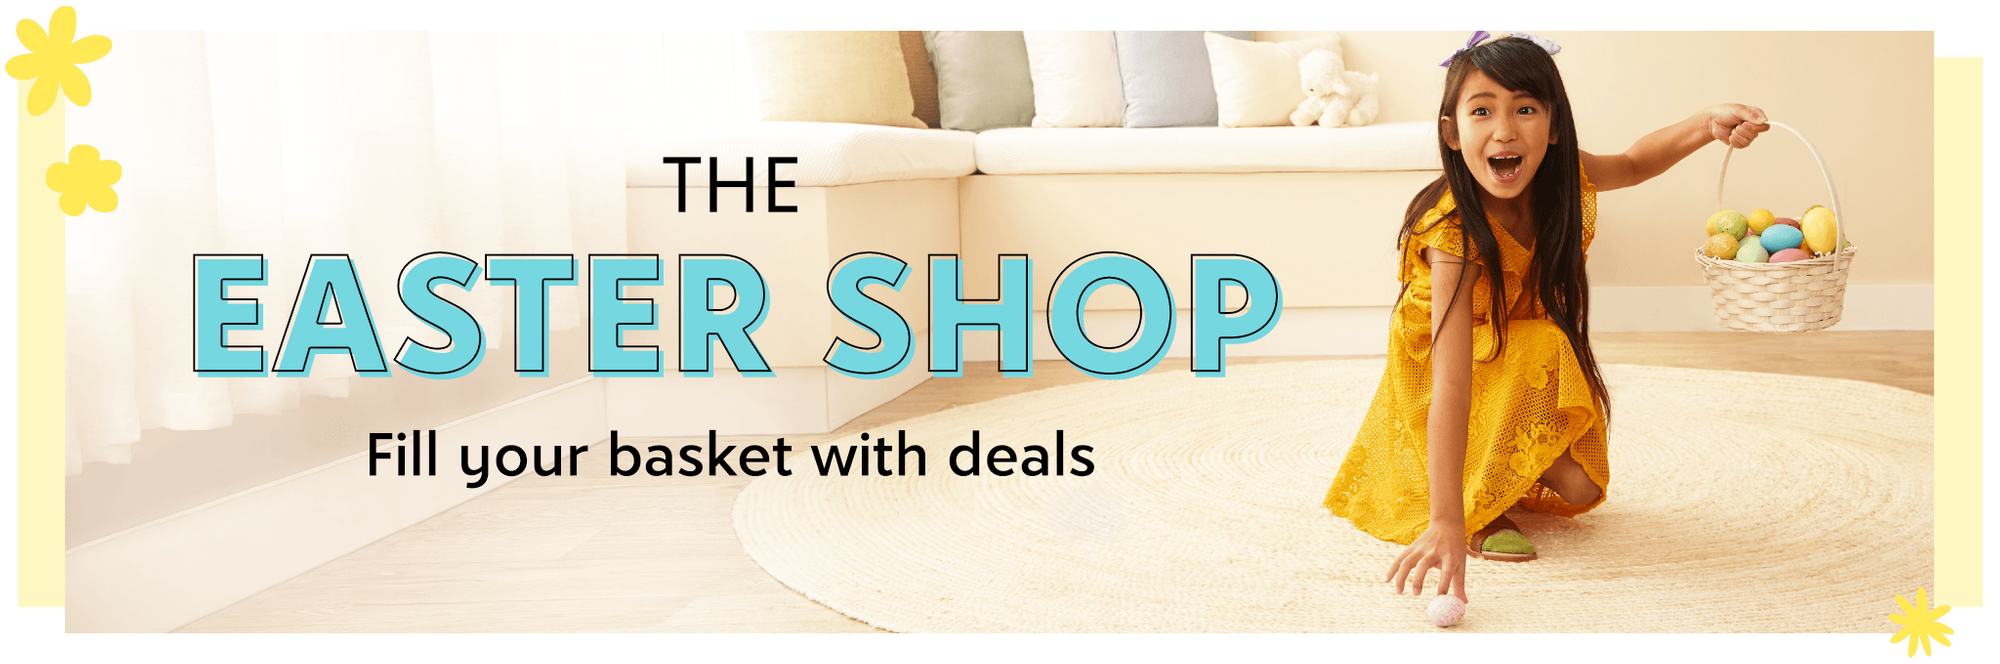 The Easter Shop - Fill your basket with deals